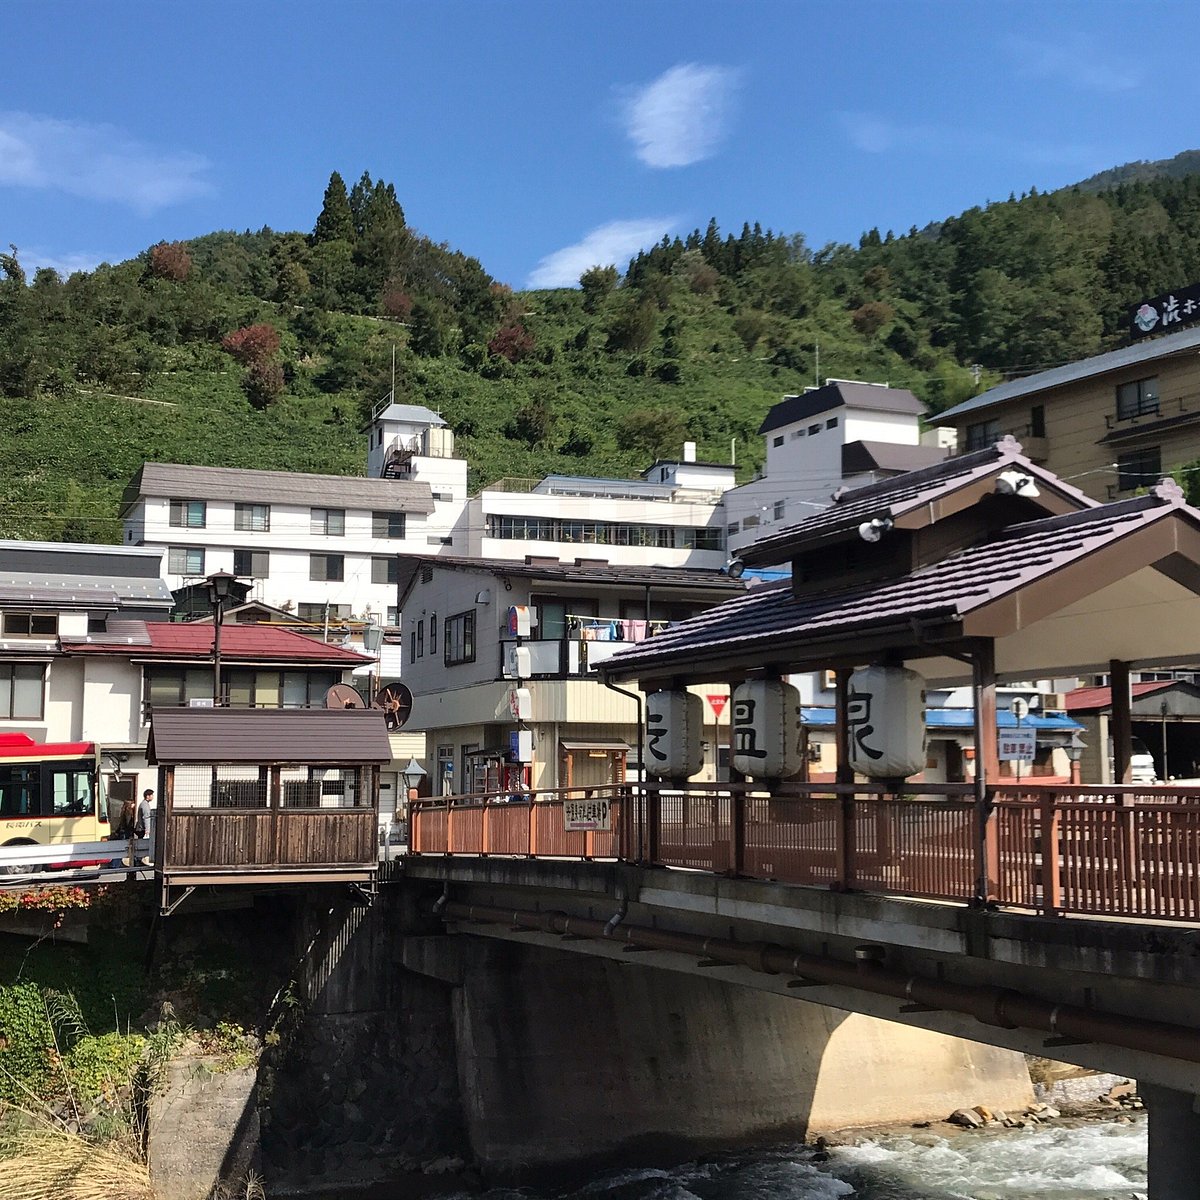 The Bathhouses of Shibu Onsen - Japan Airlines